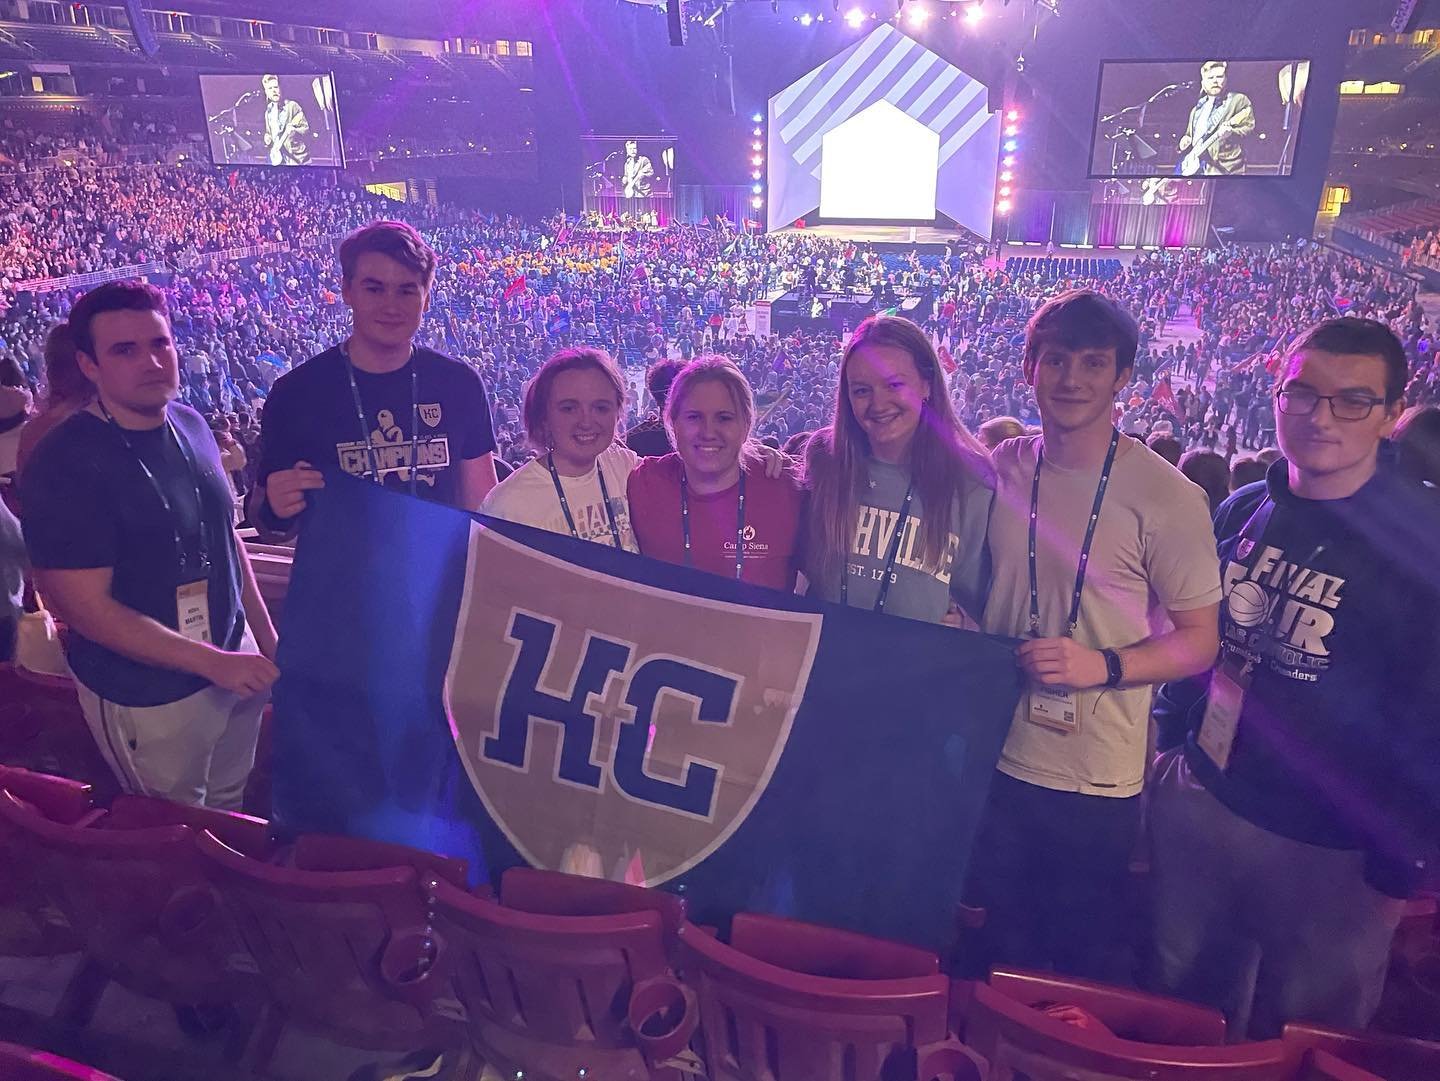 Students from Helias Catholic High School in Jefferson City gather with their banner in the Dome at America’s Center in St. Louis during the SEEK23 conference.